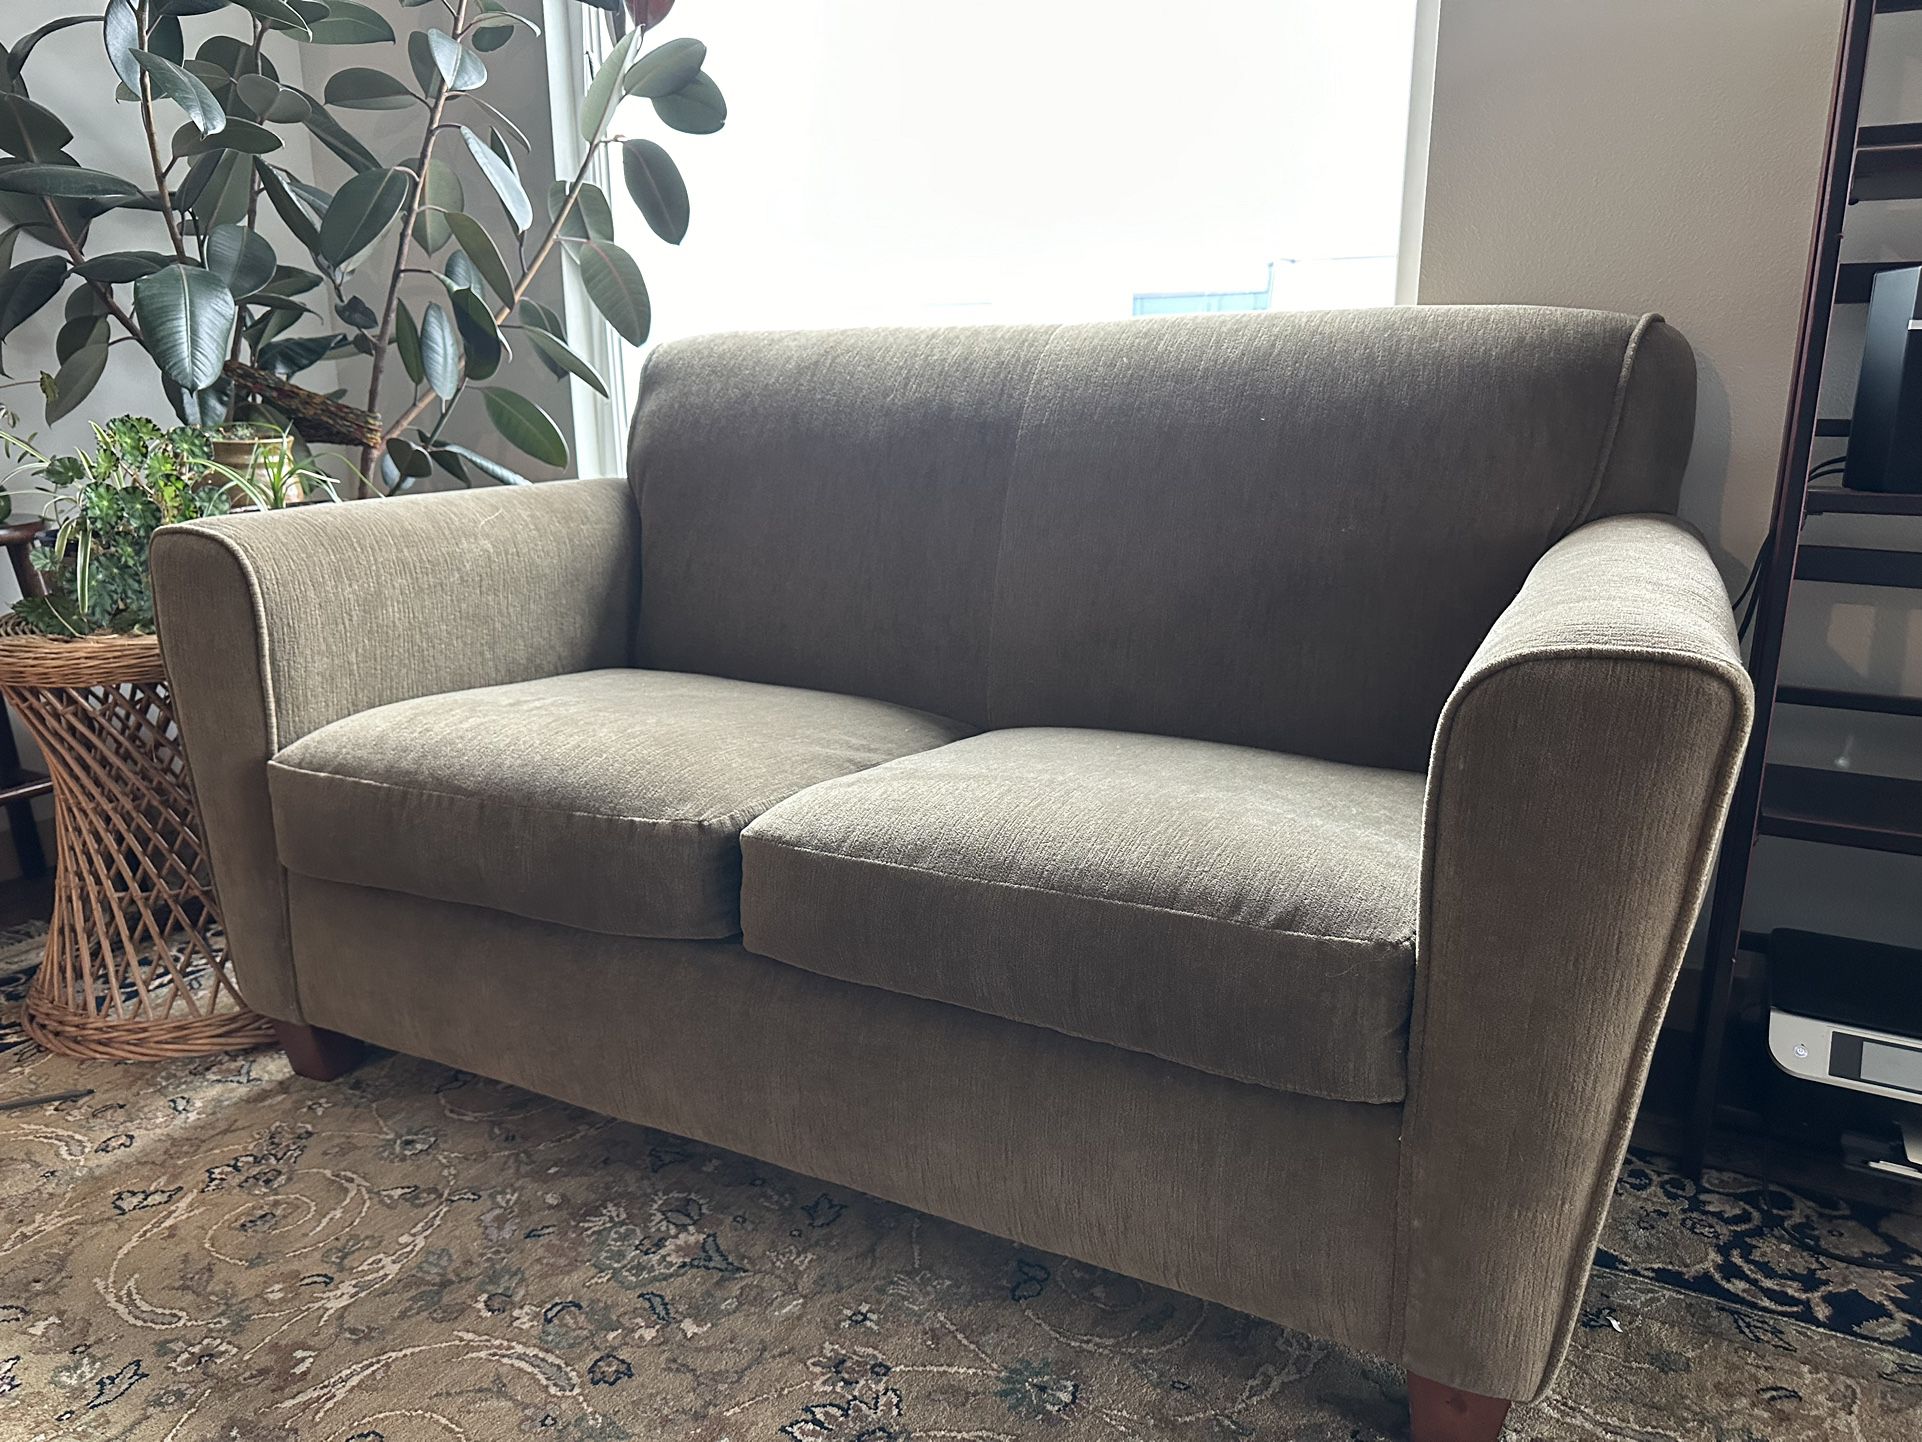 Two Matching Loveseats - Clean, Comfy, Quality